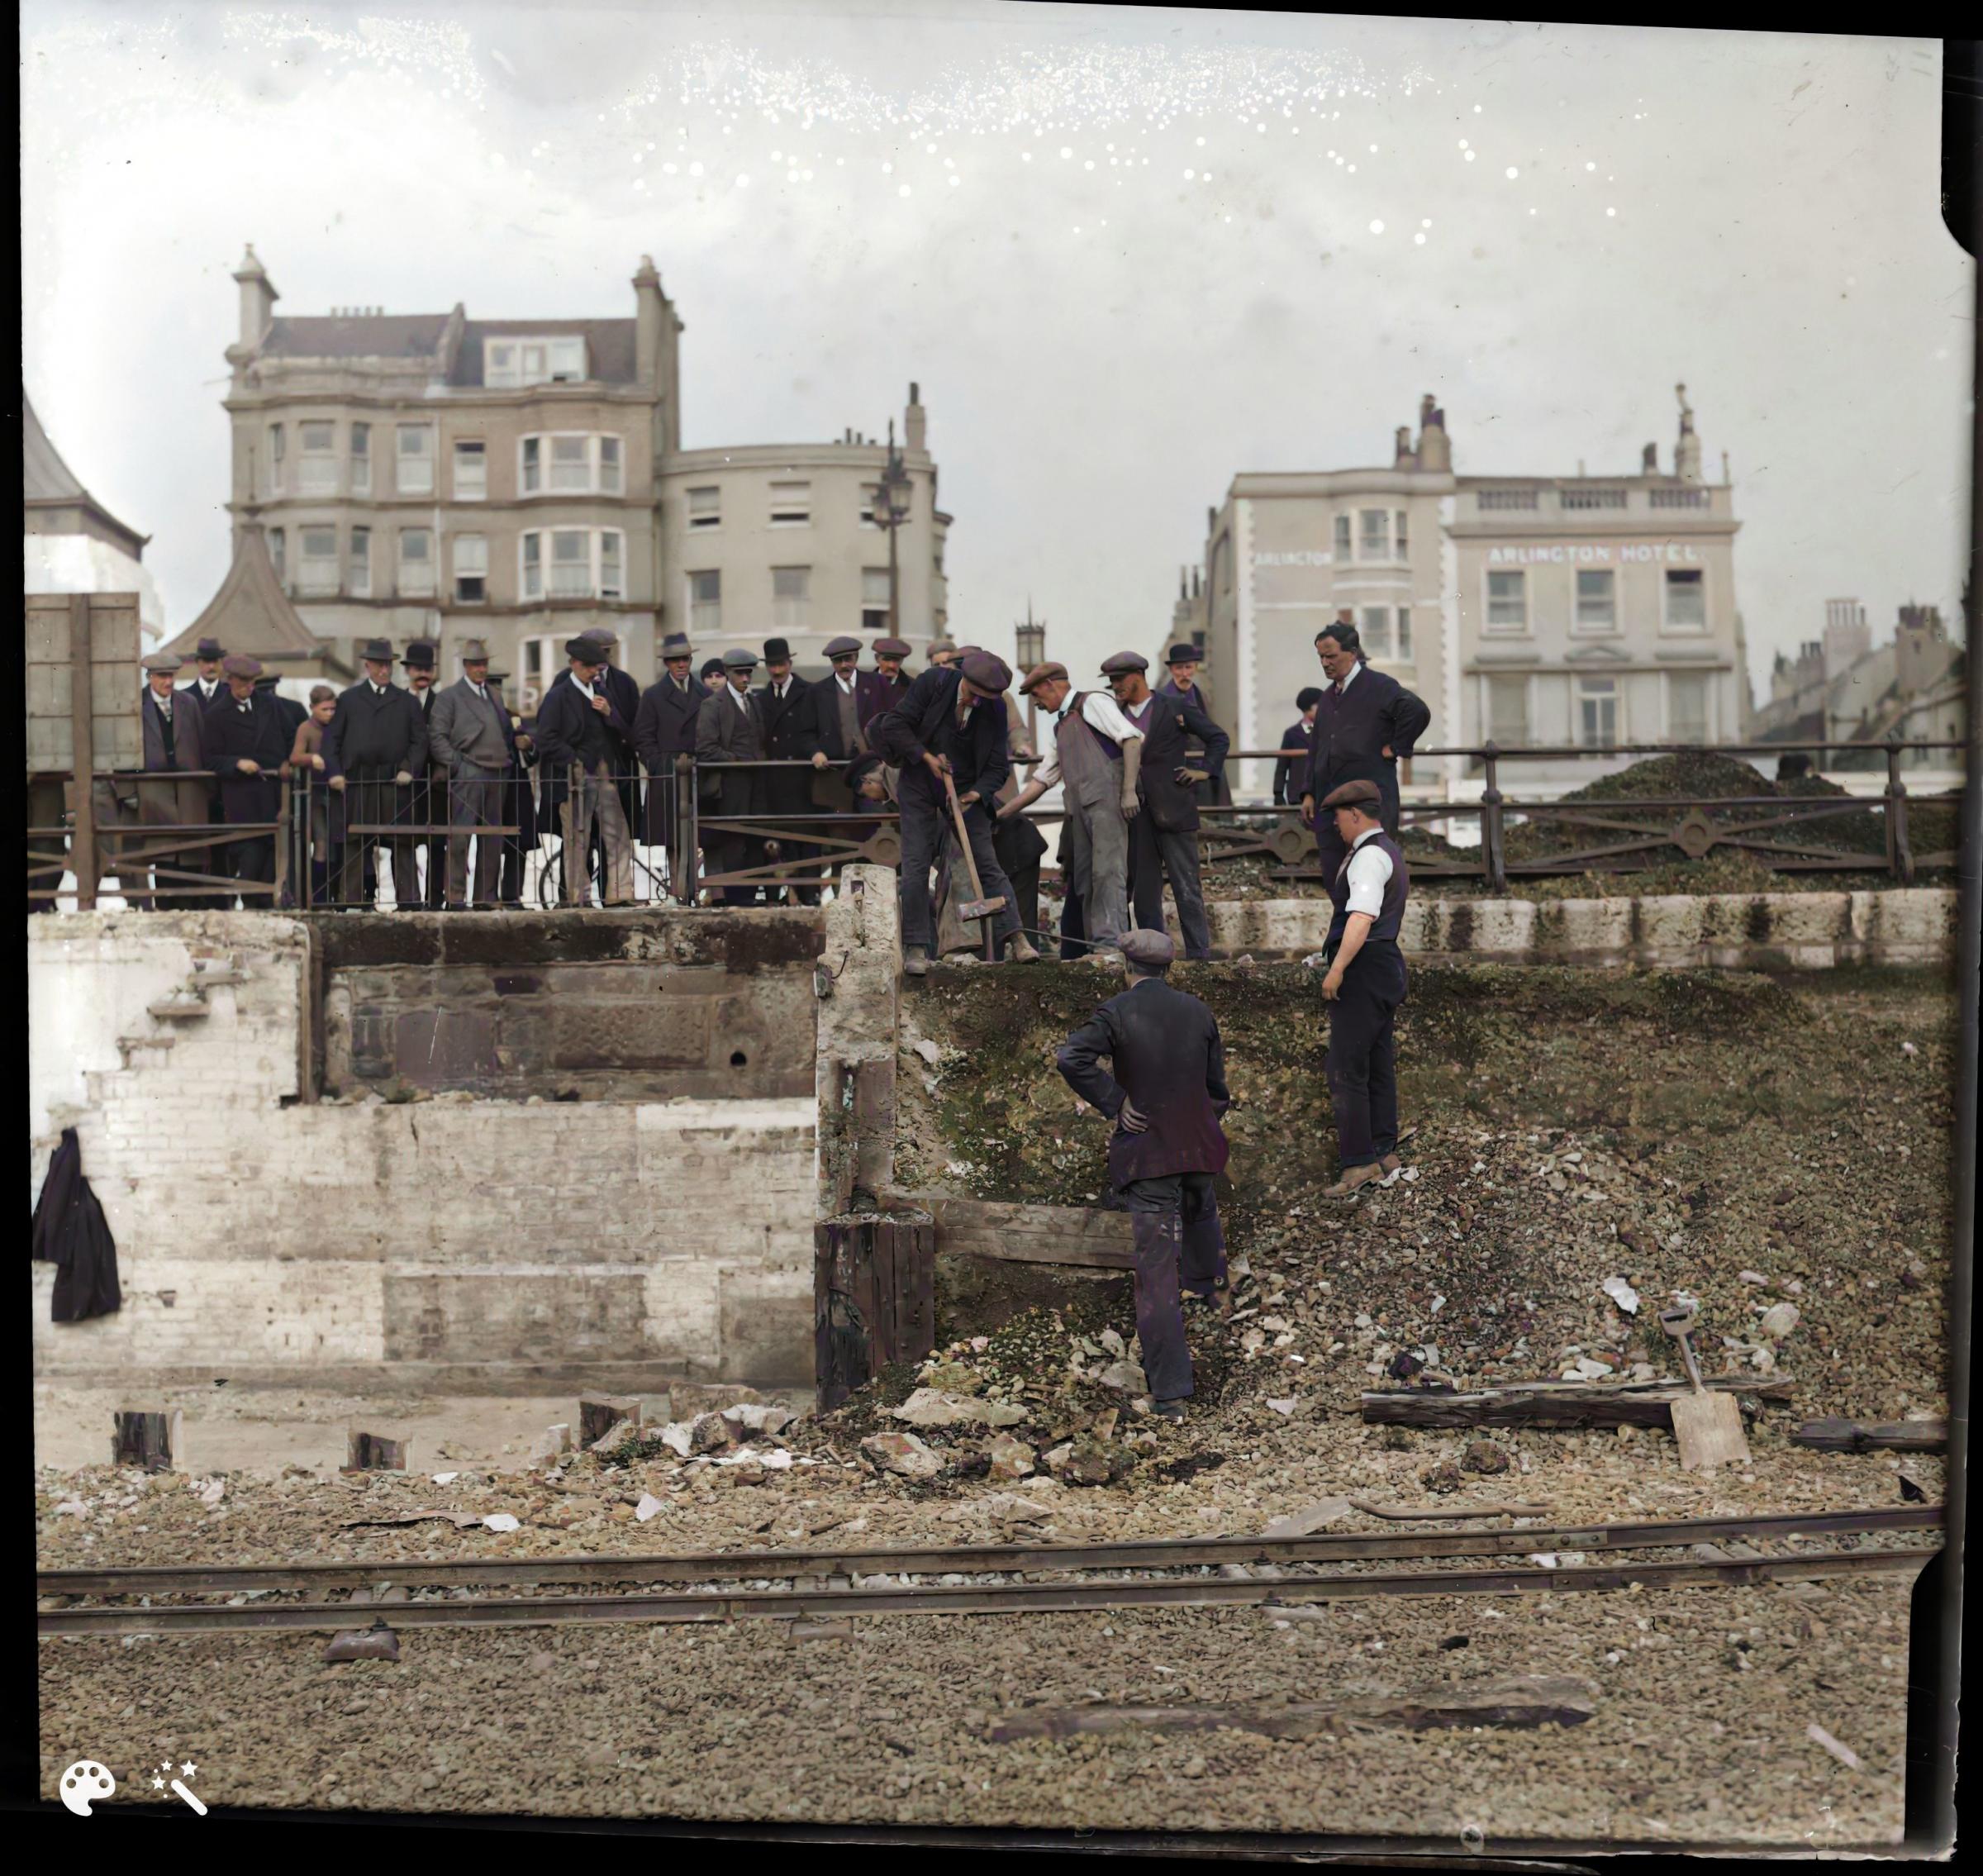 It is thought this is the demolition of the original Volk’s Railway Station on Brighton seafront, the site where the Aquarium now stands